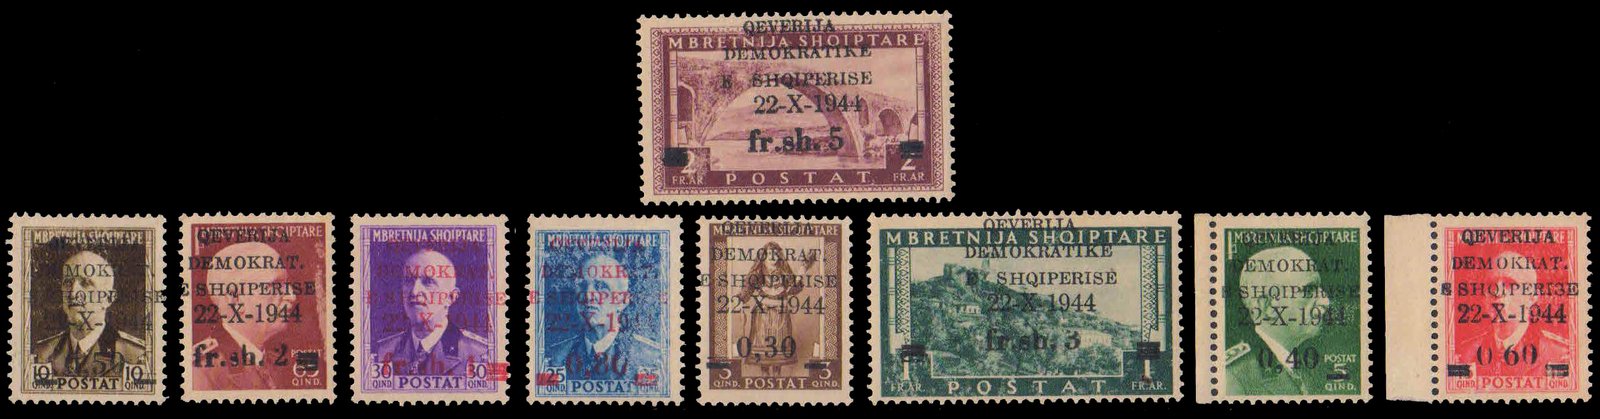 ALBANIA 1945, Surcharged Issue, King Victor Emmanuel, Set of 9, Mint G/W, S.G. 409-17, Cat � 74.25